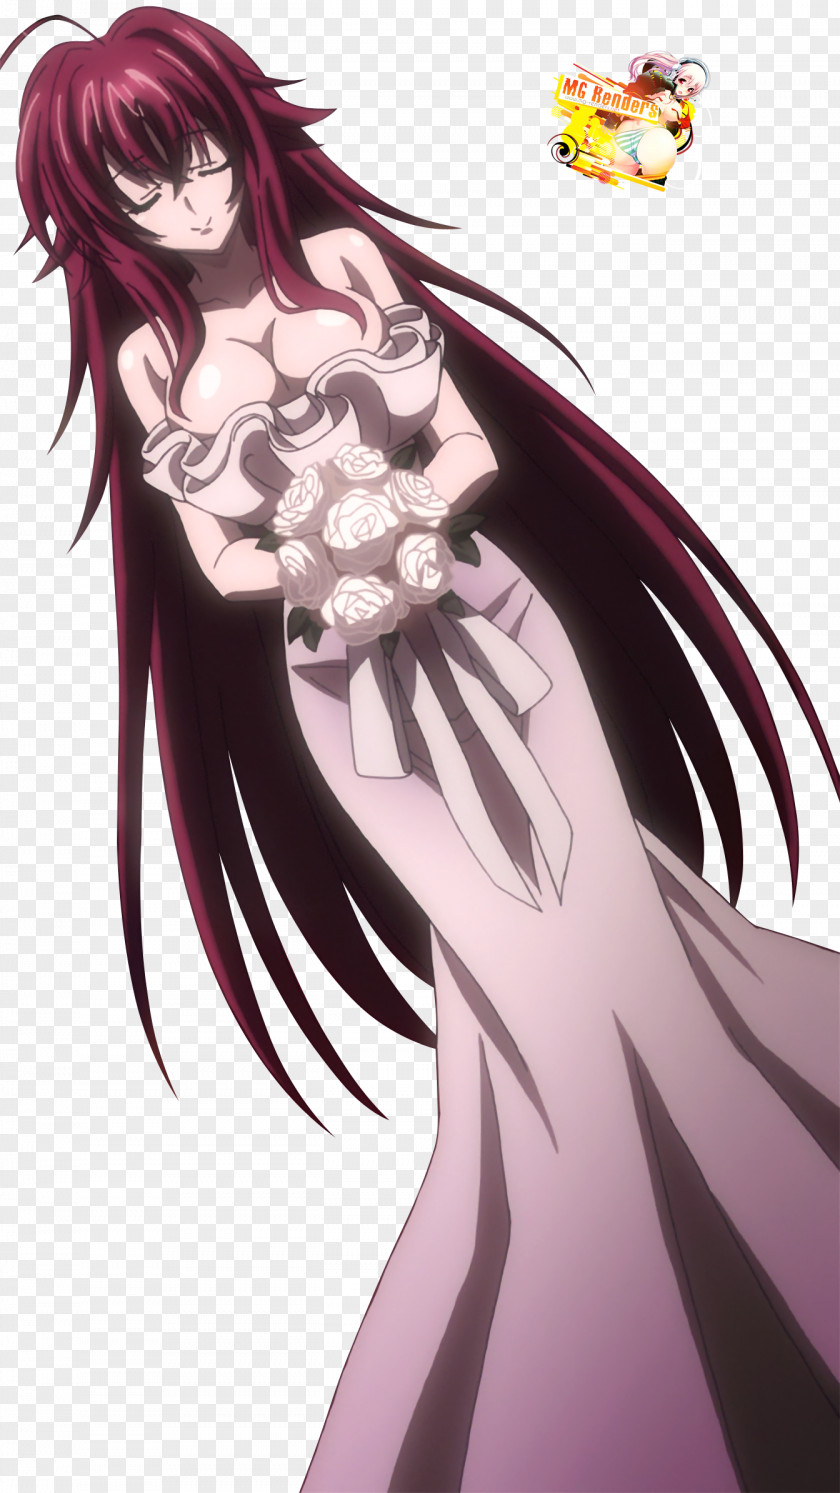 Rias Gremory High School DxD Anime Wedding Dress PNG dress, clipart PNG